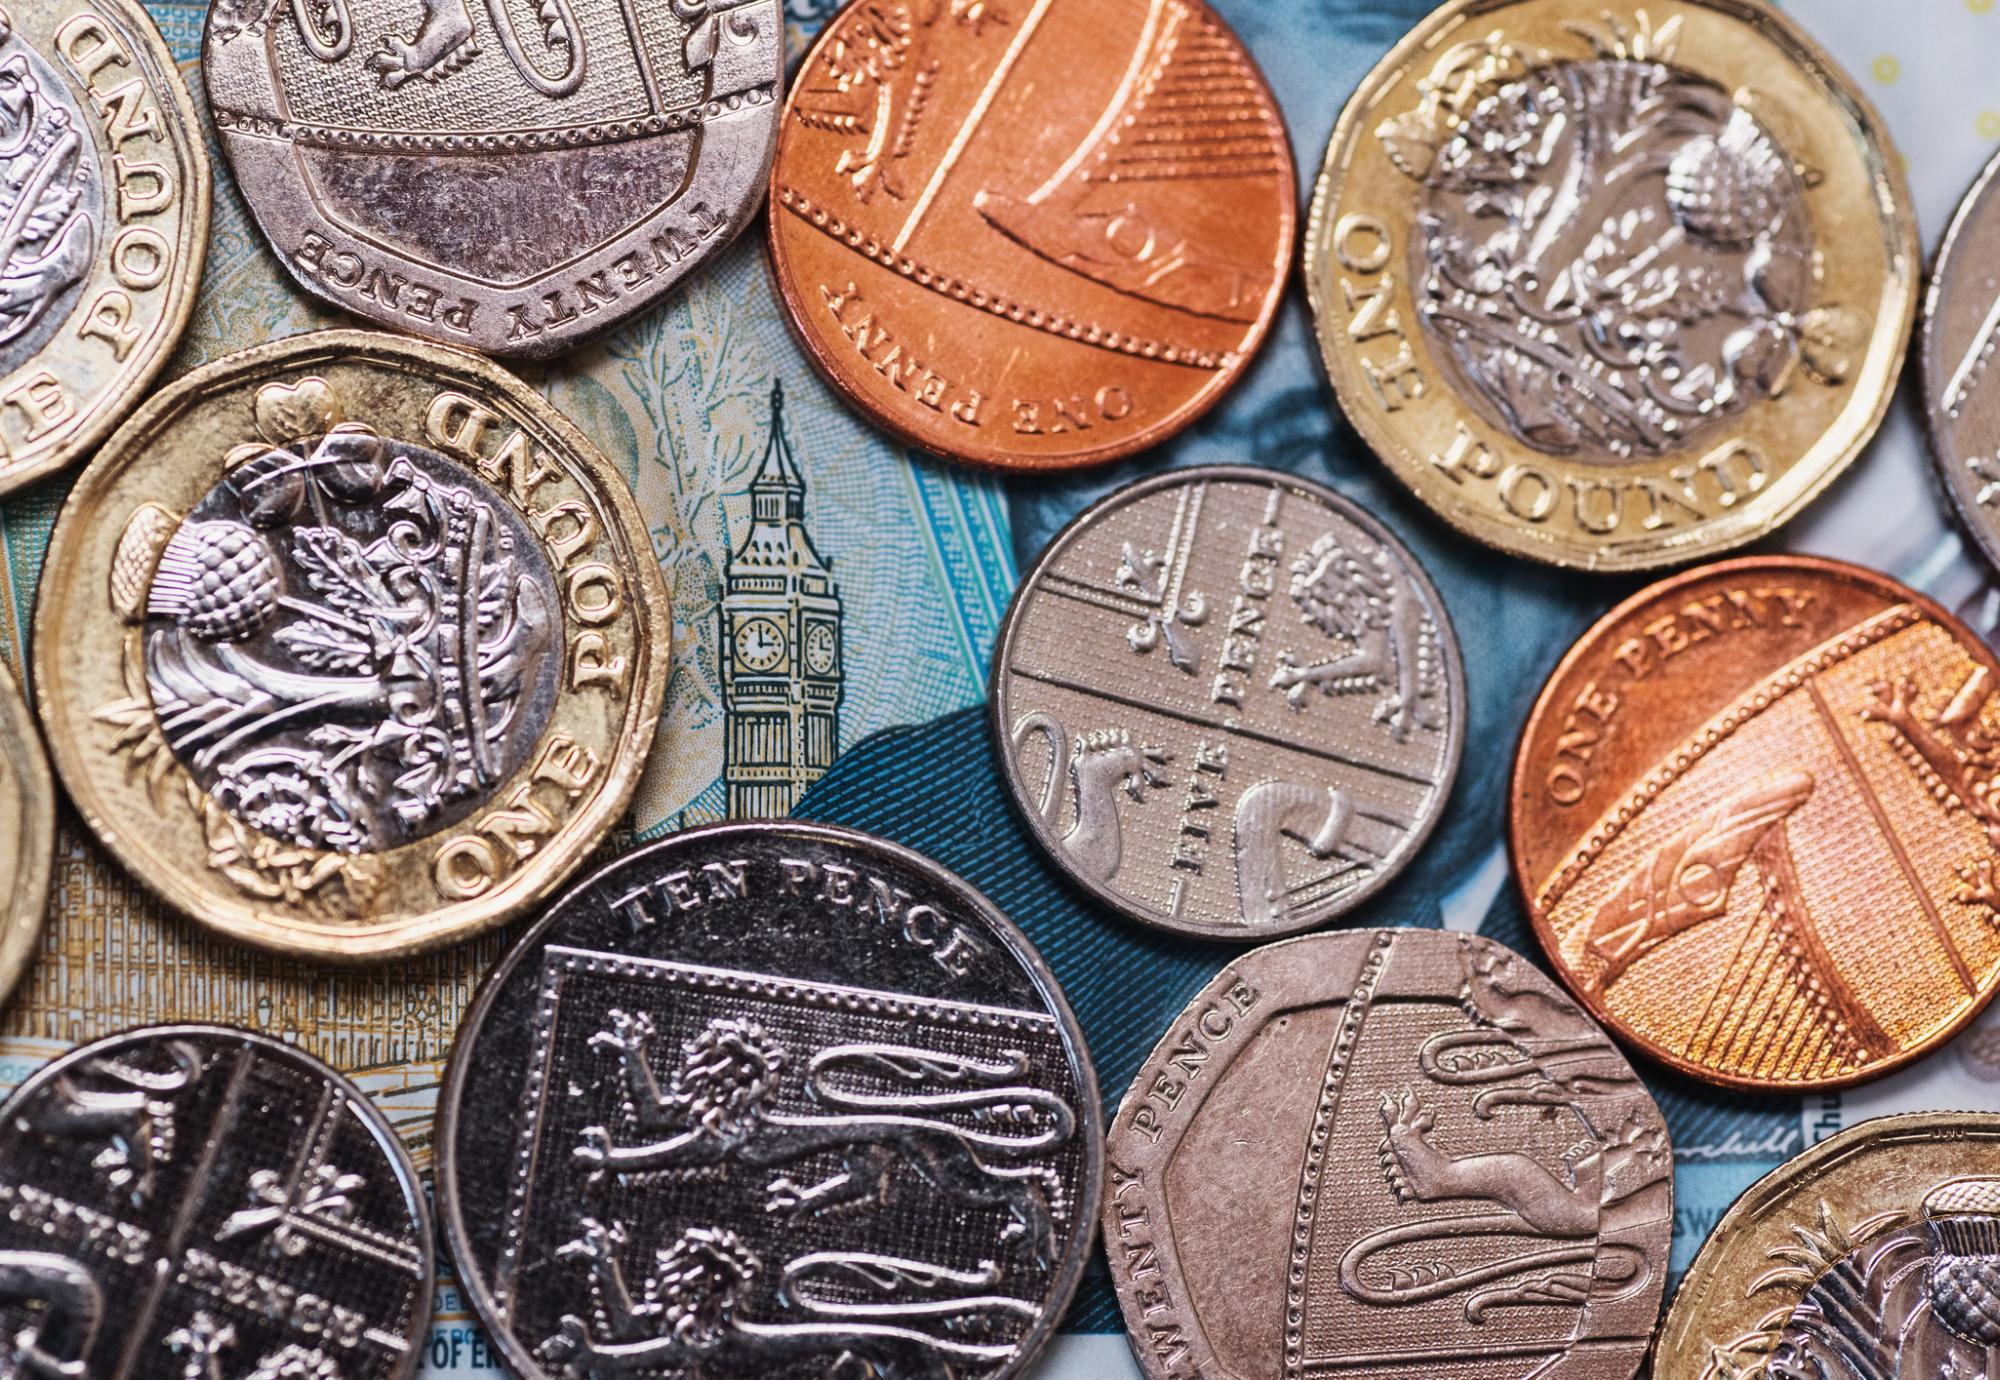 Coins placed over a five pound note revealing the Elizabeth Tower.